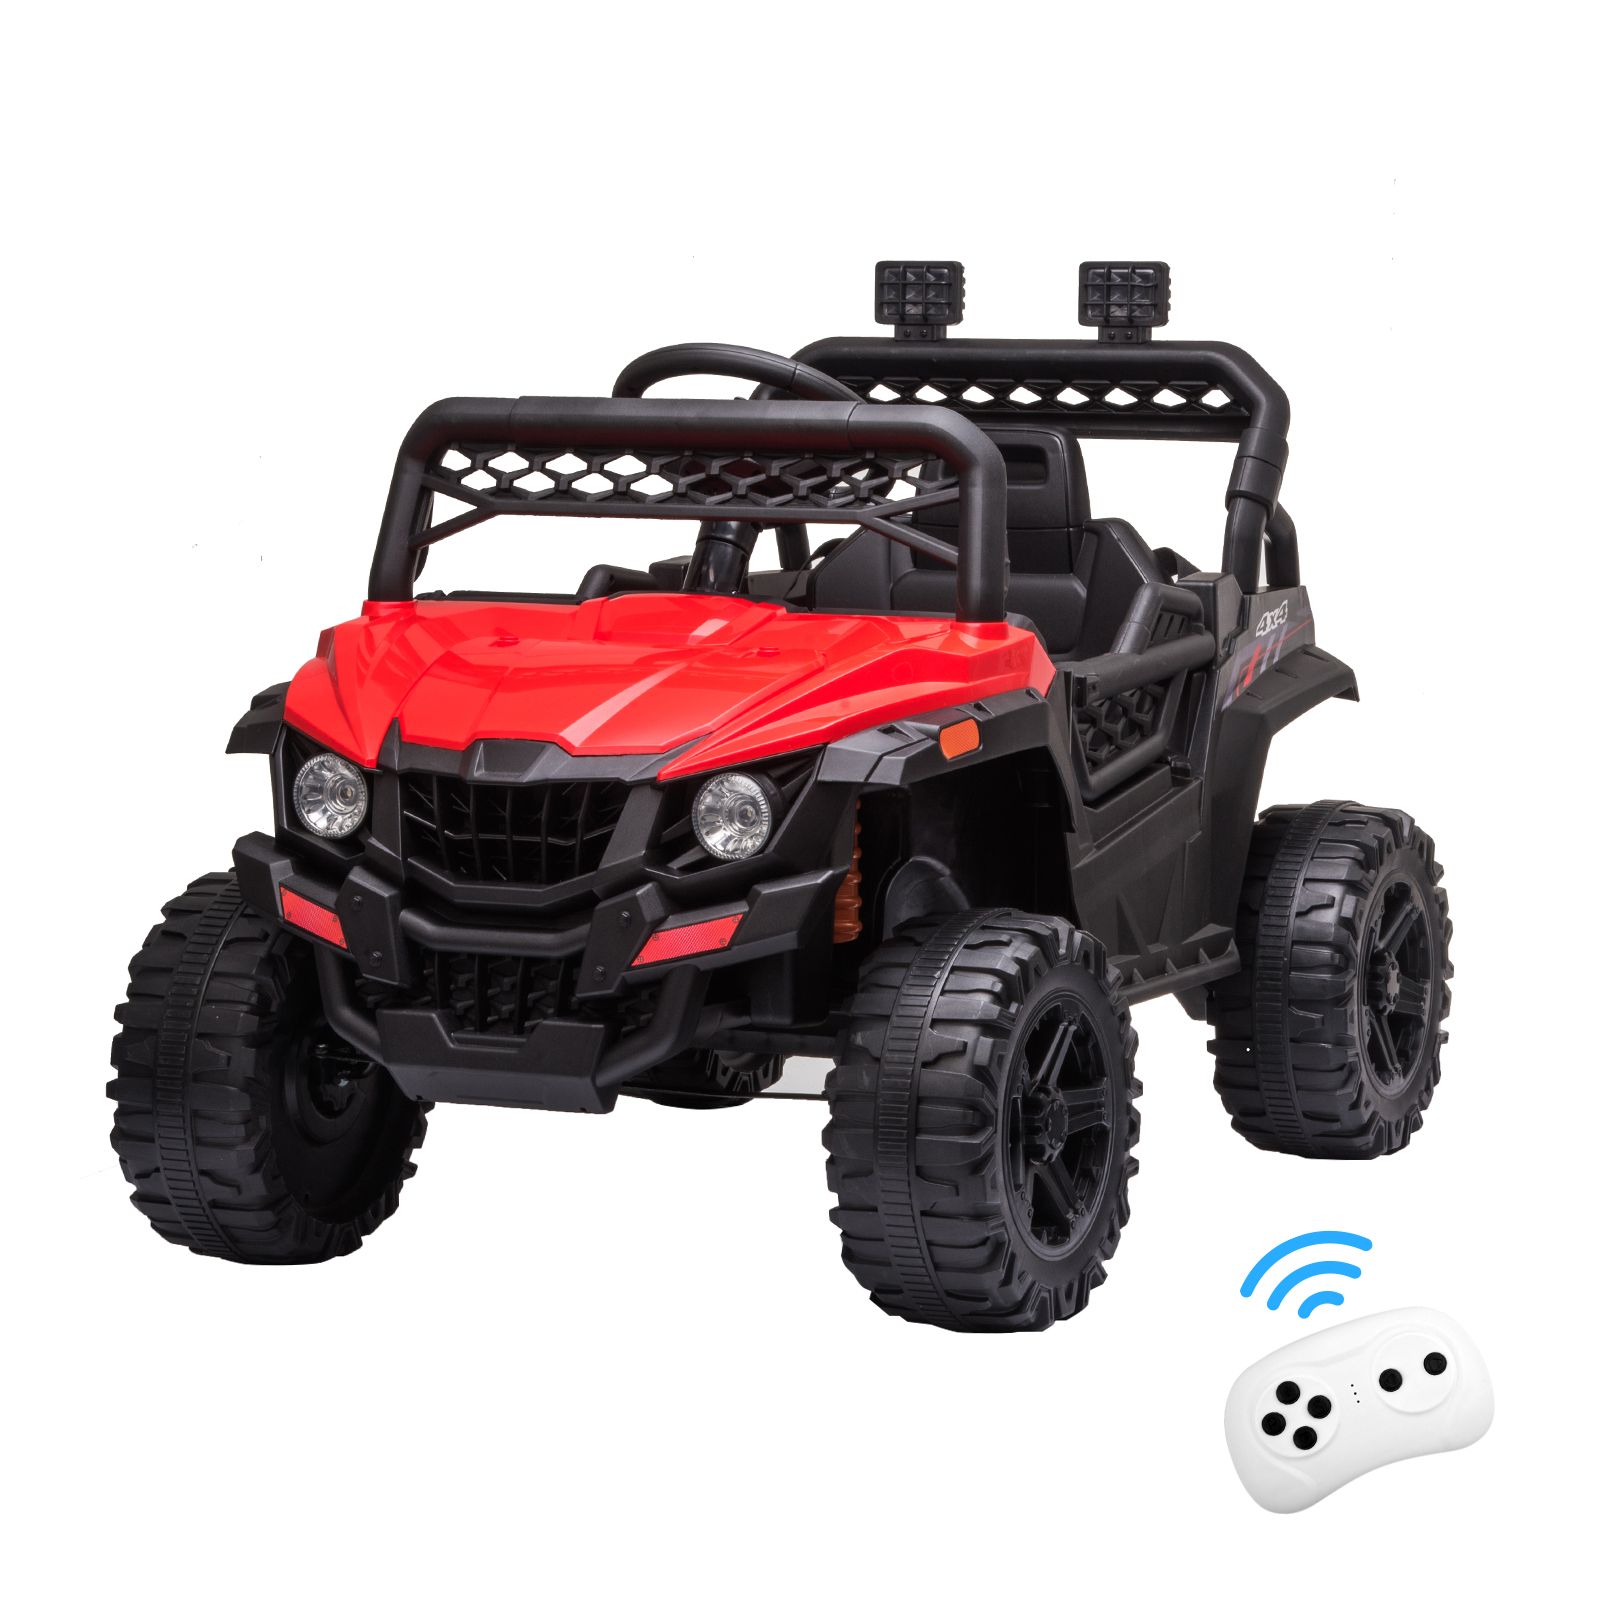 Kids Electric Car UTV Battery Remote Control Ride On Toy Vehicle Charging Off Road Racing Jeep 12V Red Lights Music Radio Rear Storage